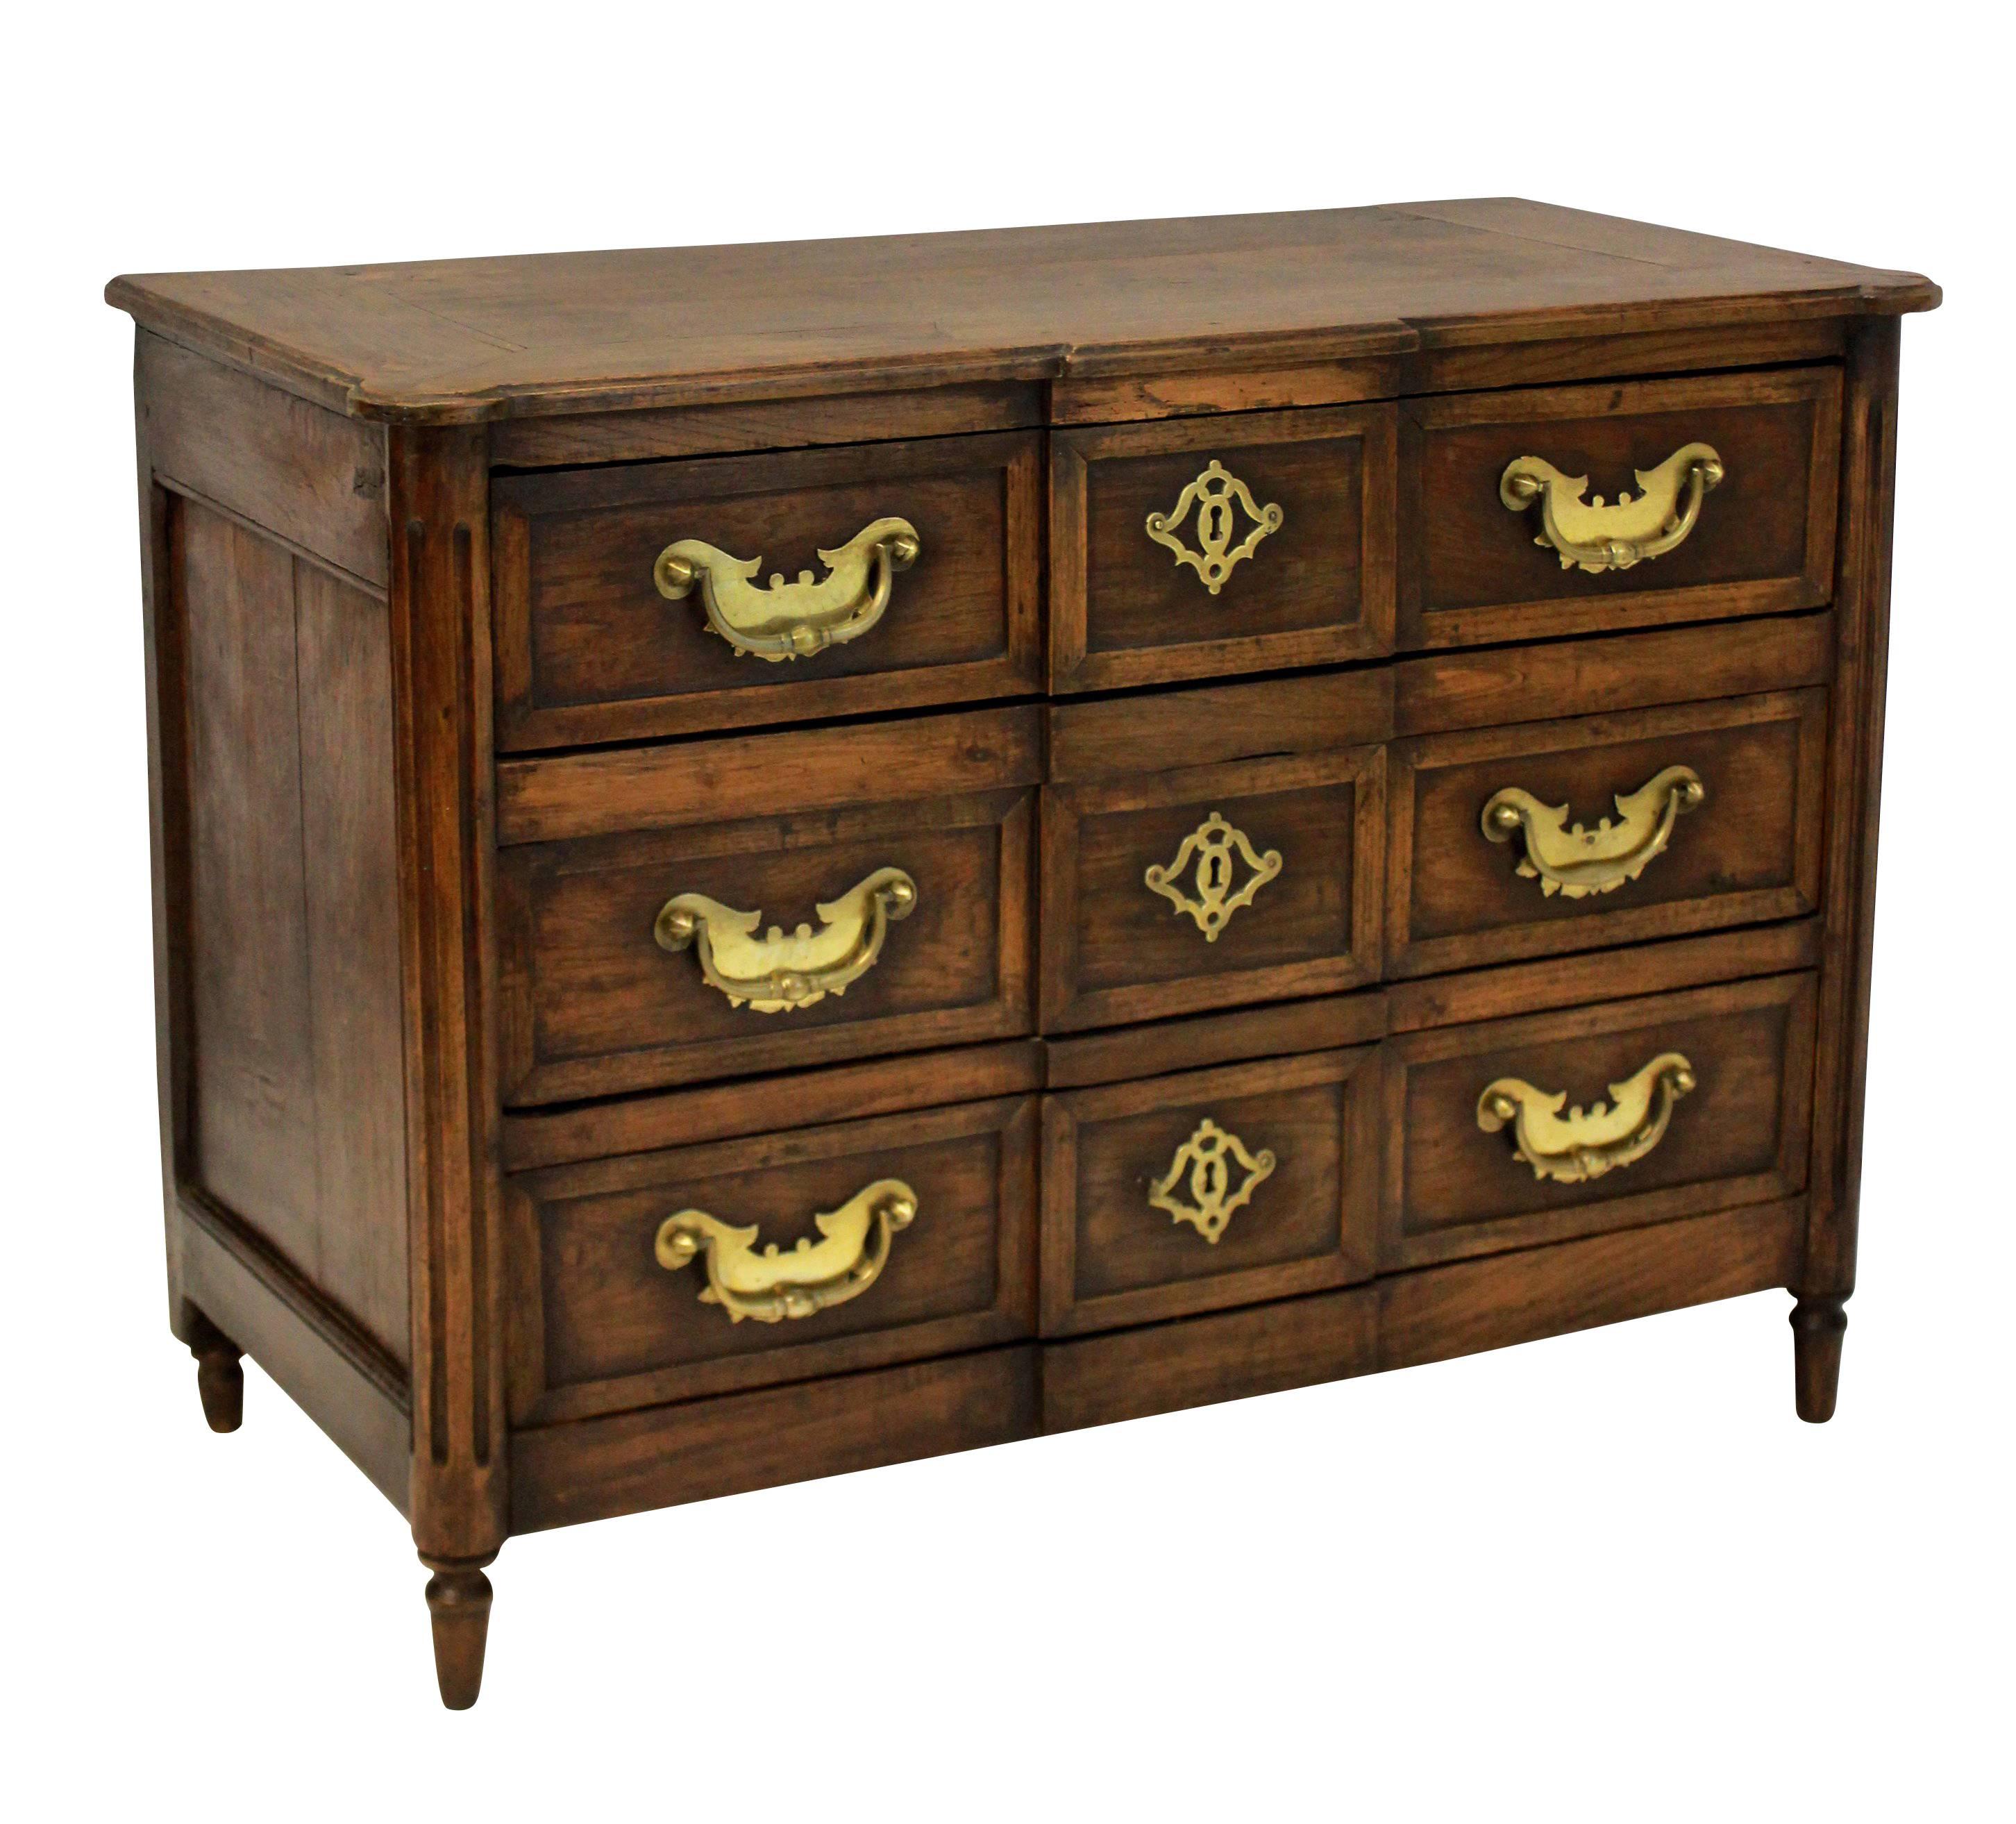 A French provincial commode in oak with beautiful brass handles and escutcheons.

   